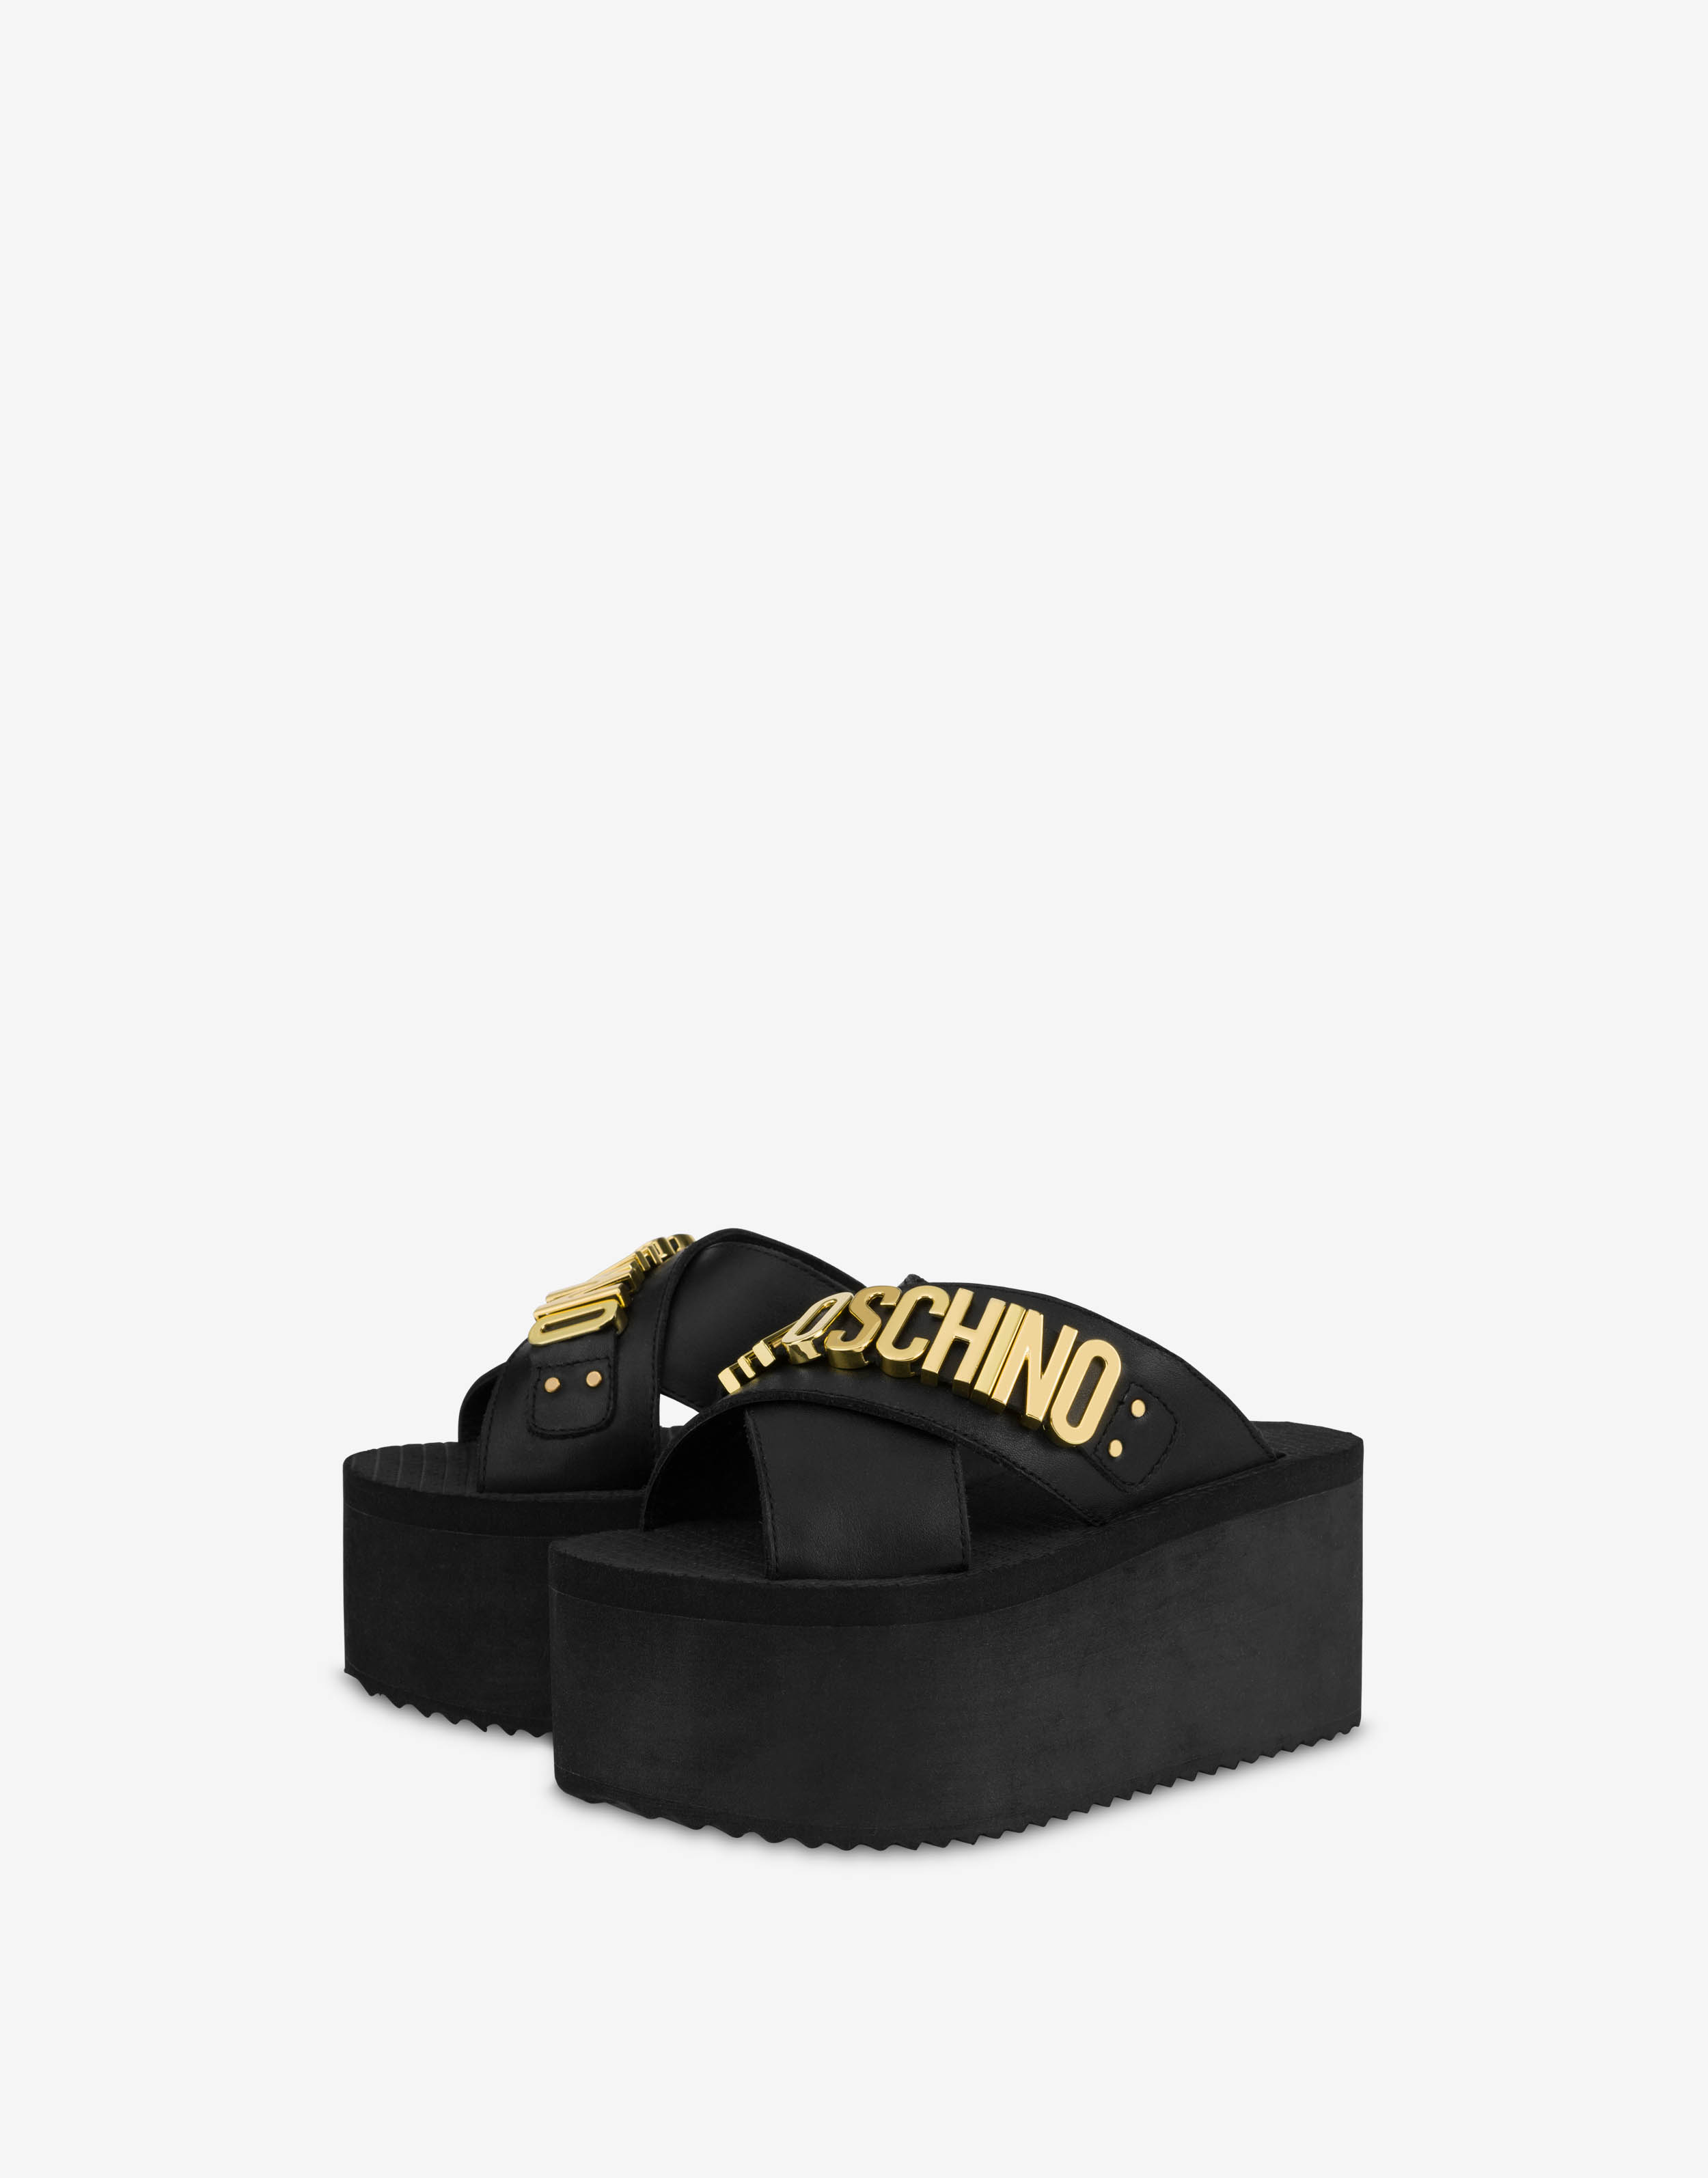 Moschino サンダル for レディース - Official Store